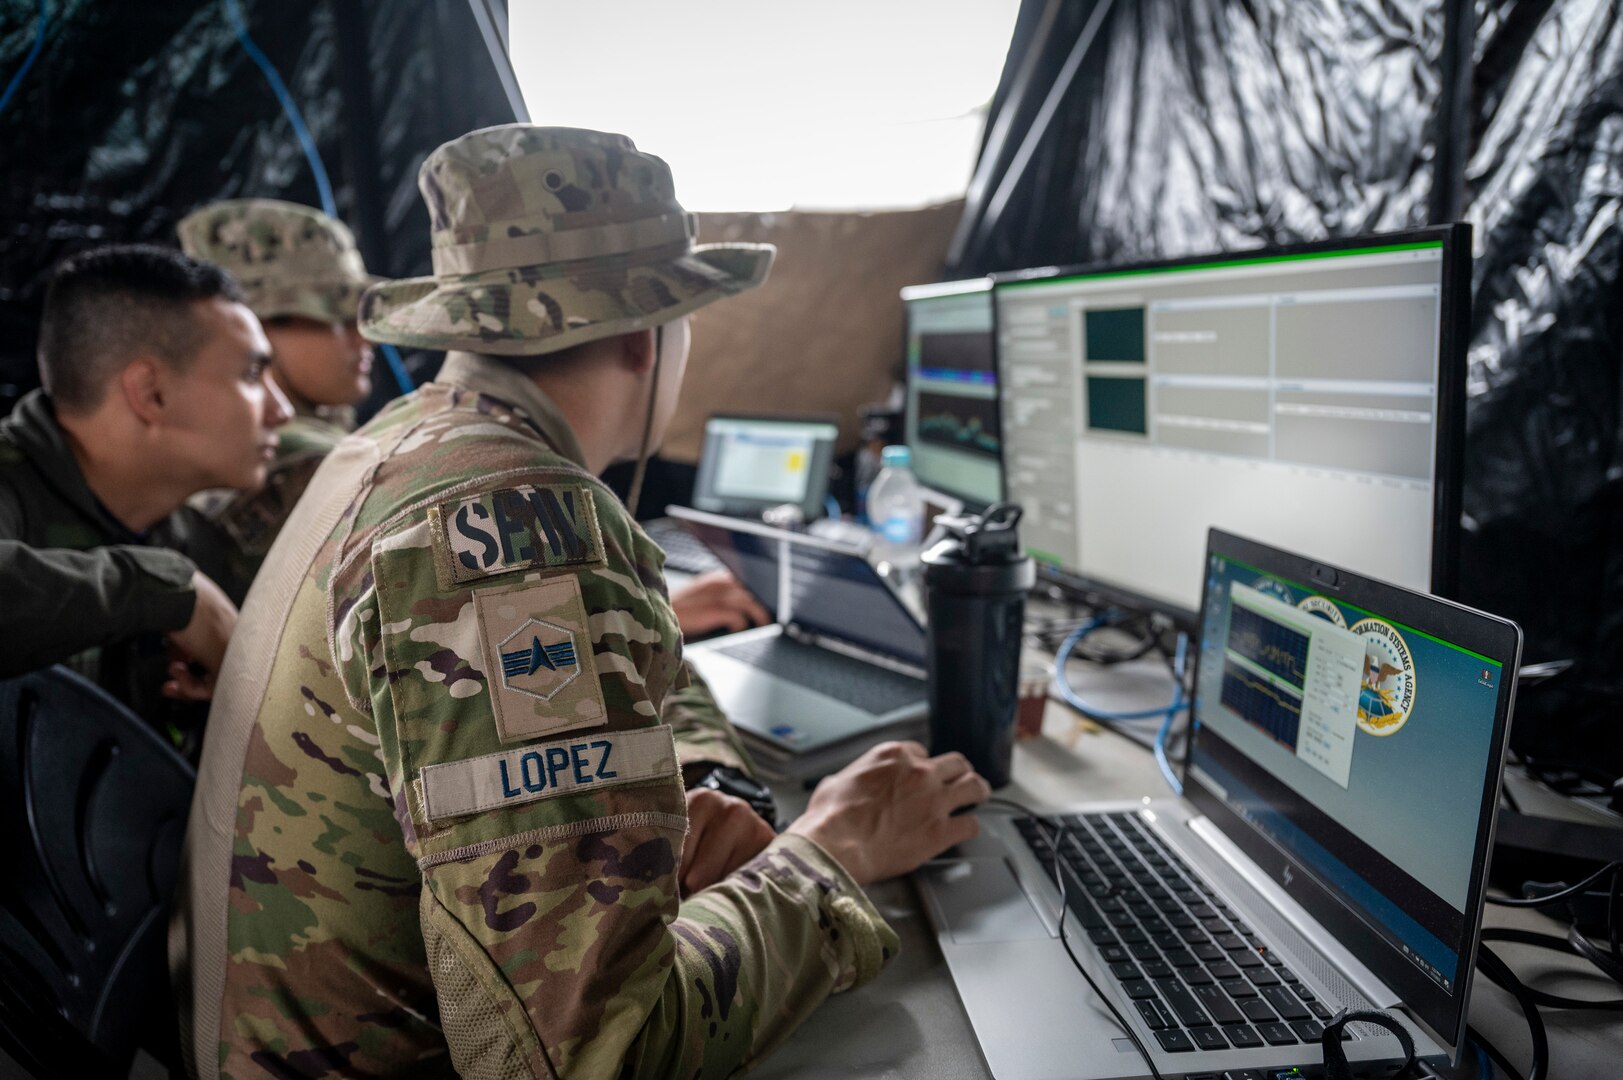 U. S. Space Force Spec. Alejandro Lopez II, 16th Electromagnetic Warfare Squadron, trains Colombian Air Force partners on the Multi-band Assessment of the Communication Environment (MACE) system as part of Operation Thundergun Express, a 21-day space deployment exercise nested under Resolute Sentinel 23. MACE is a rapidly-deployable, cost-effective, user friendly spectrum analysis and monitoring tool that was key in demonstrating space Agile Combat Employment capabilities during the exercise.